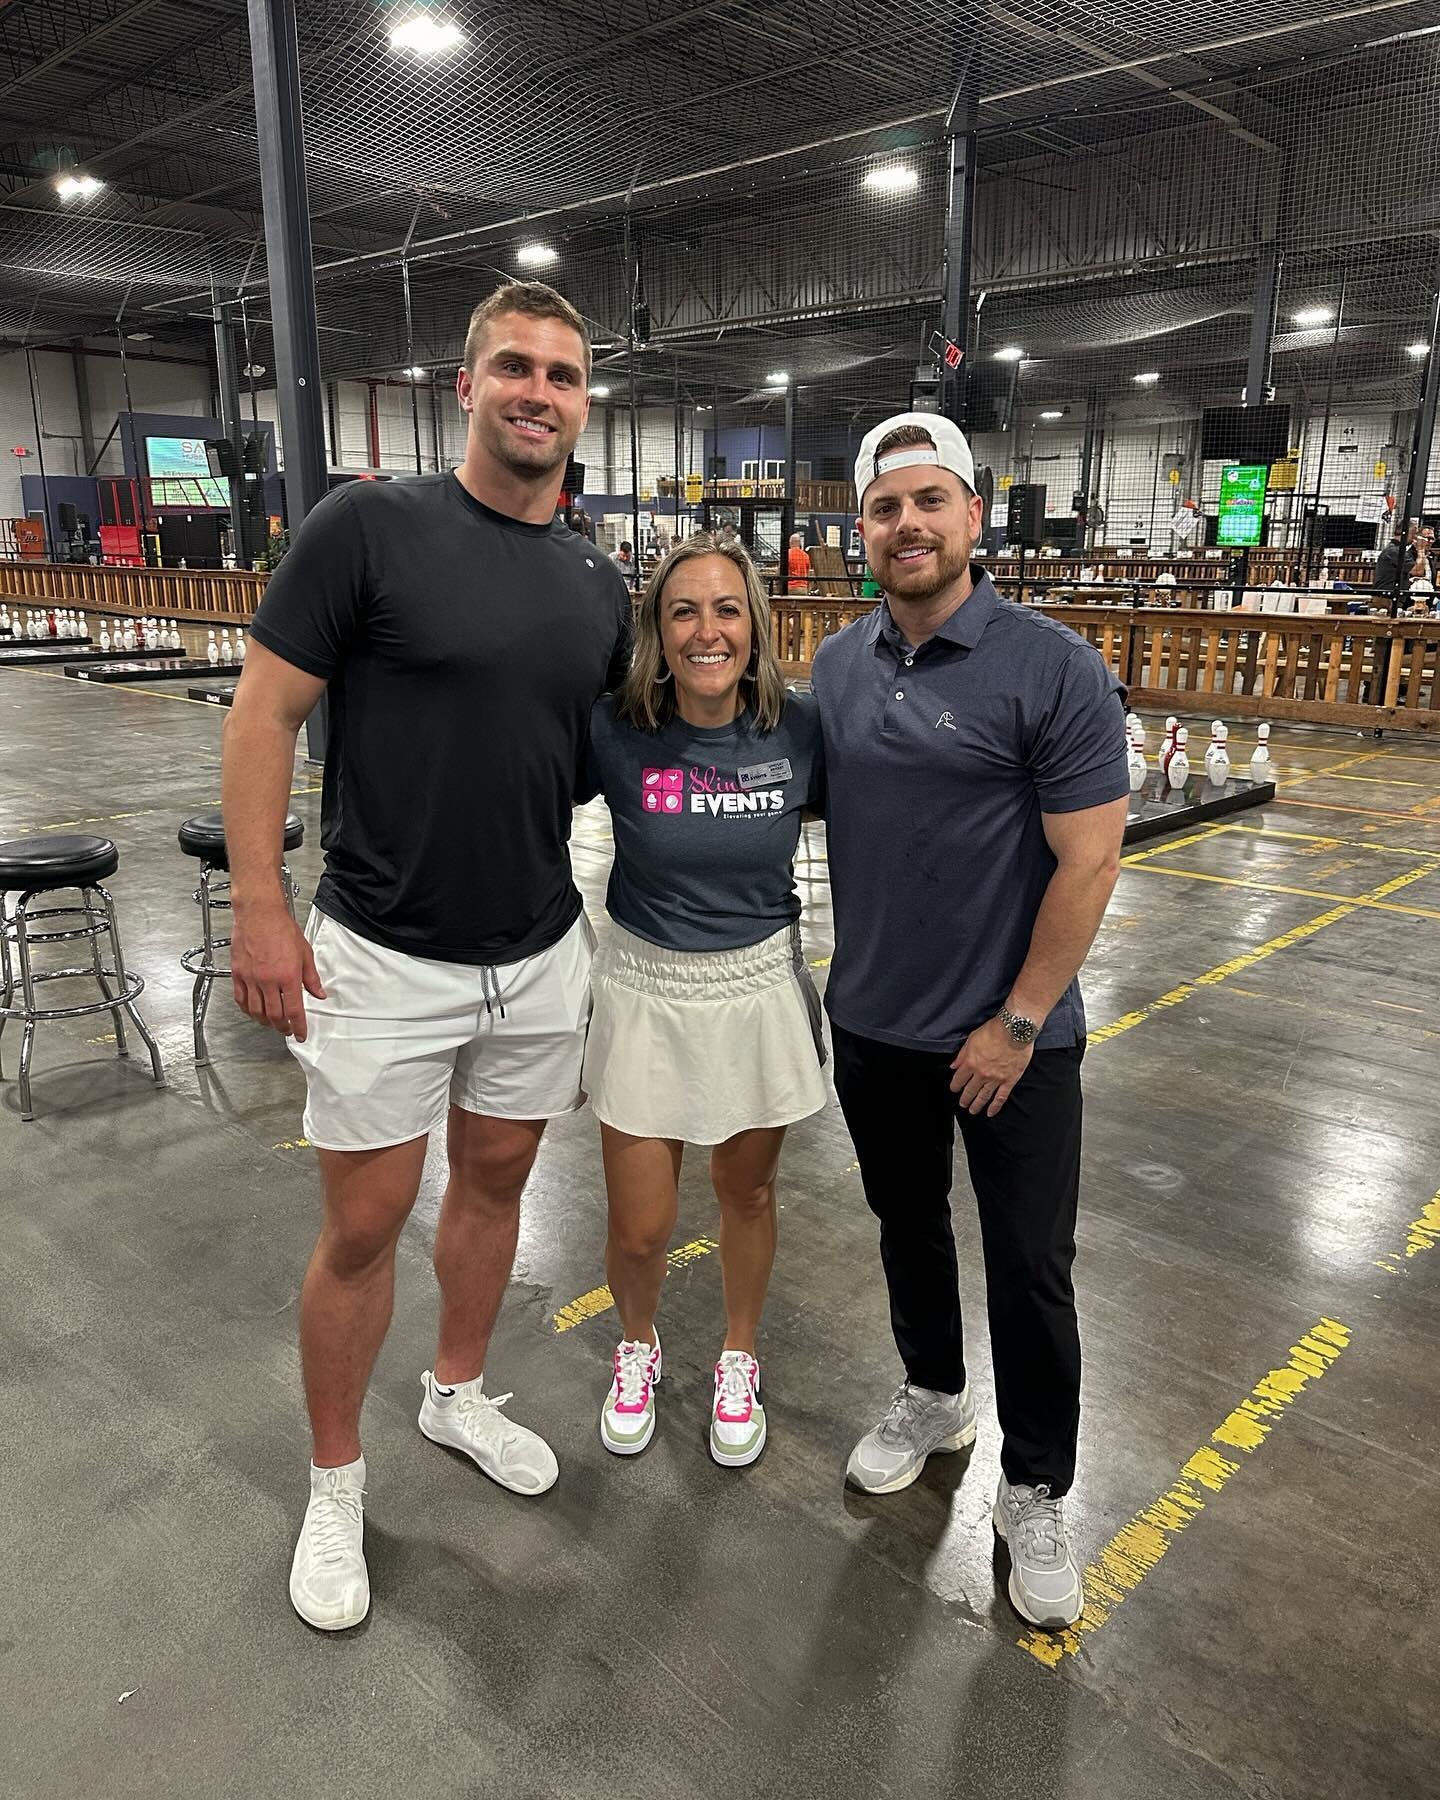 The 4th annual @sam_hubbard_foundation Fowling tournament was a huge success! 

Thank you to all who supported and @slinkevents for crushing it as always.